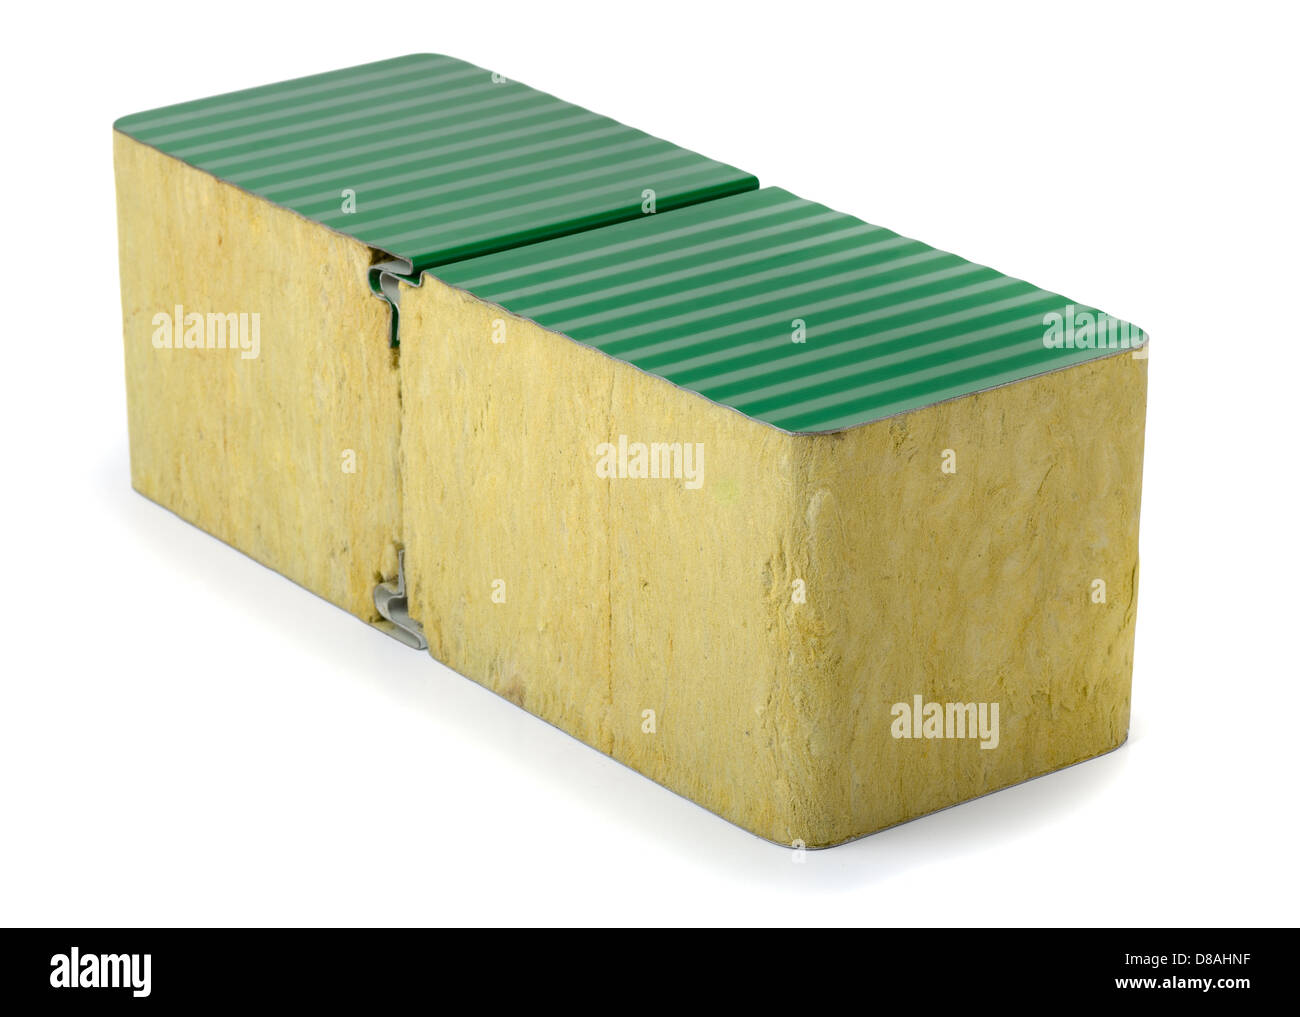 Aluminium composite panel with mineral wool core Stock Photo